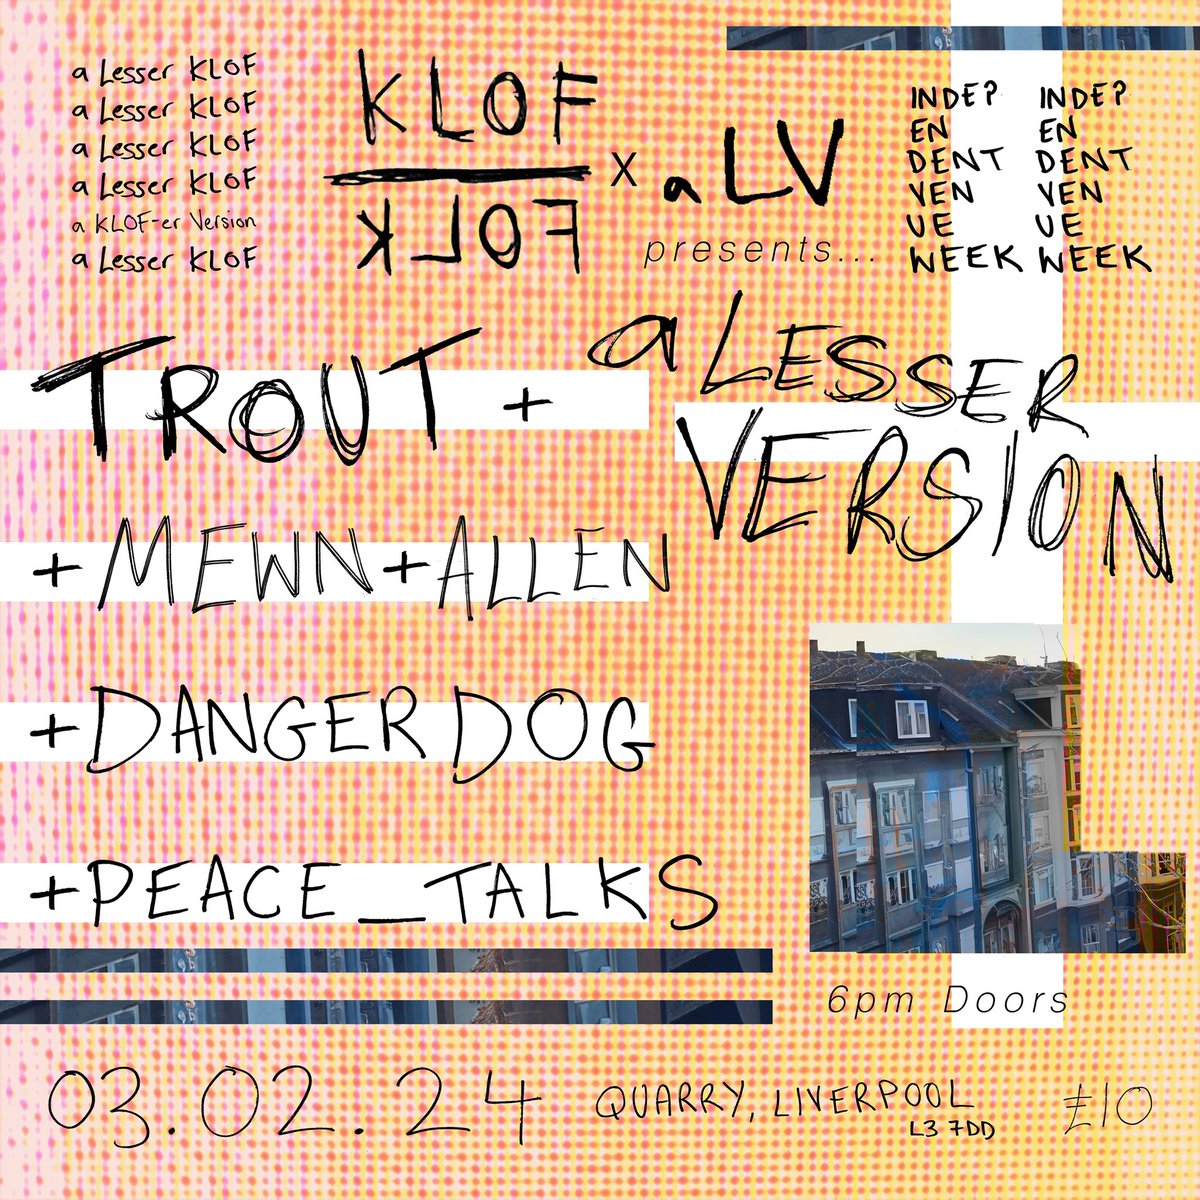 The full line-up for our IVW week party at QUARRY is here, and it’s a sight to behold!! Now w/ added Trout, Danger Dog, + Peace_Talks 🌞💃🏻